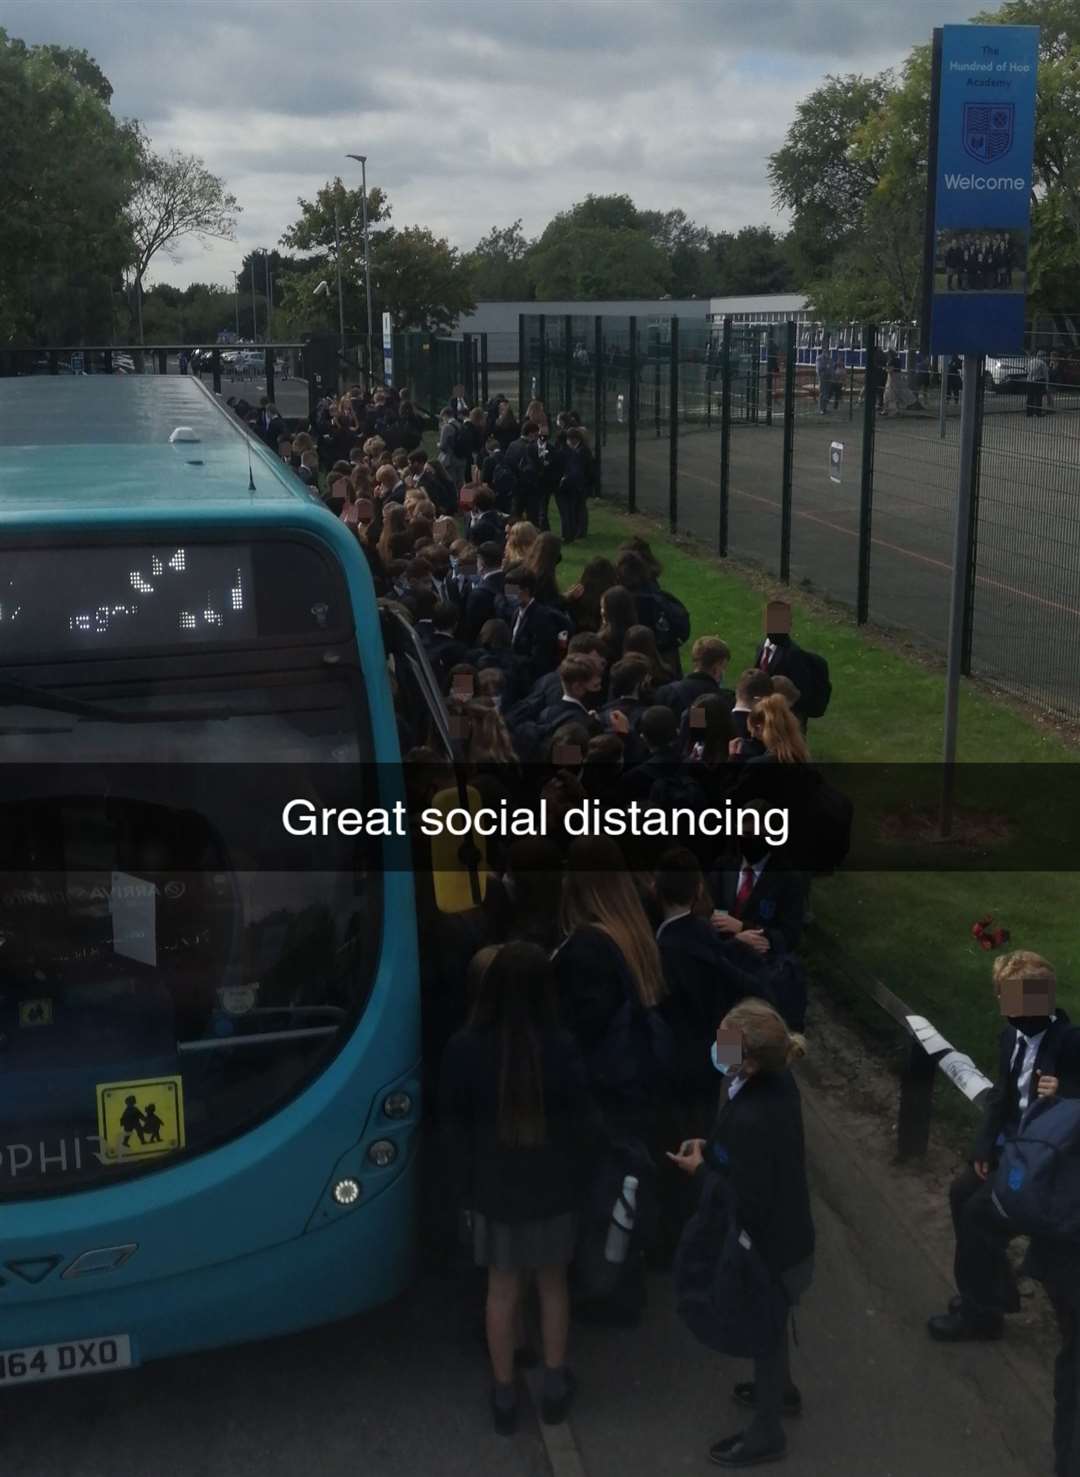 A picture circulated on social media of pupils crowded around the buses outside Hundred of Hoo Academy